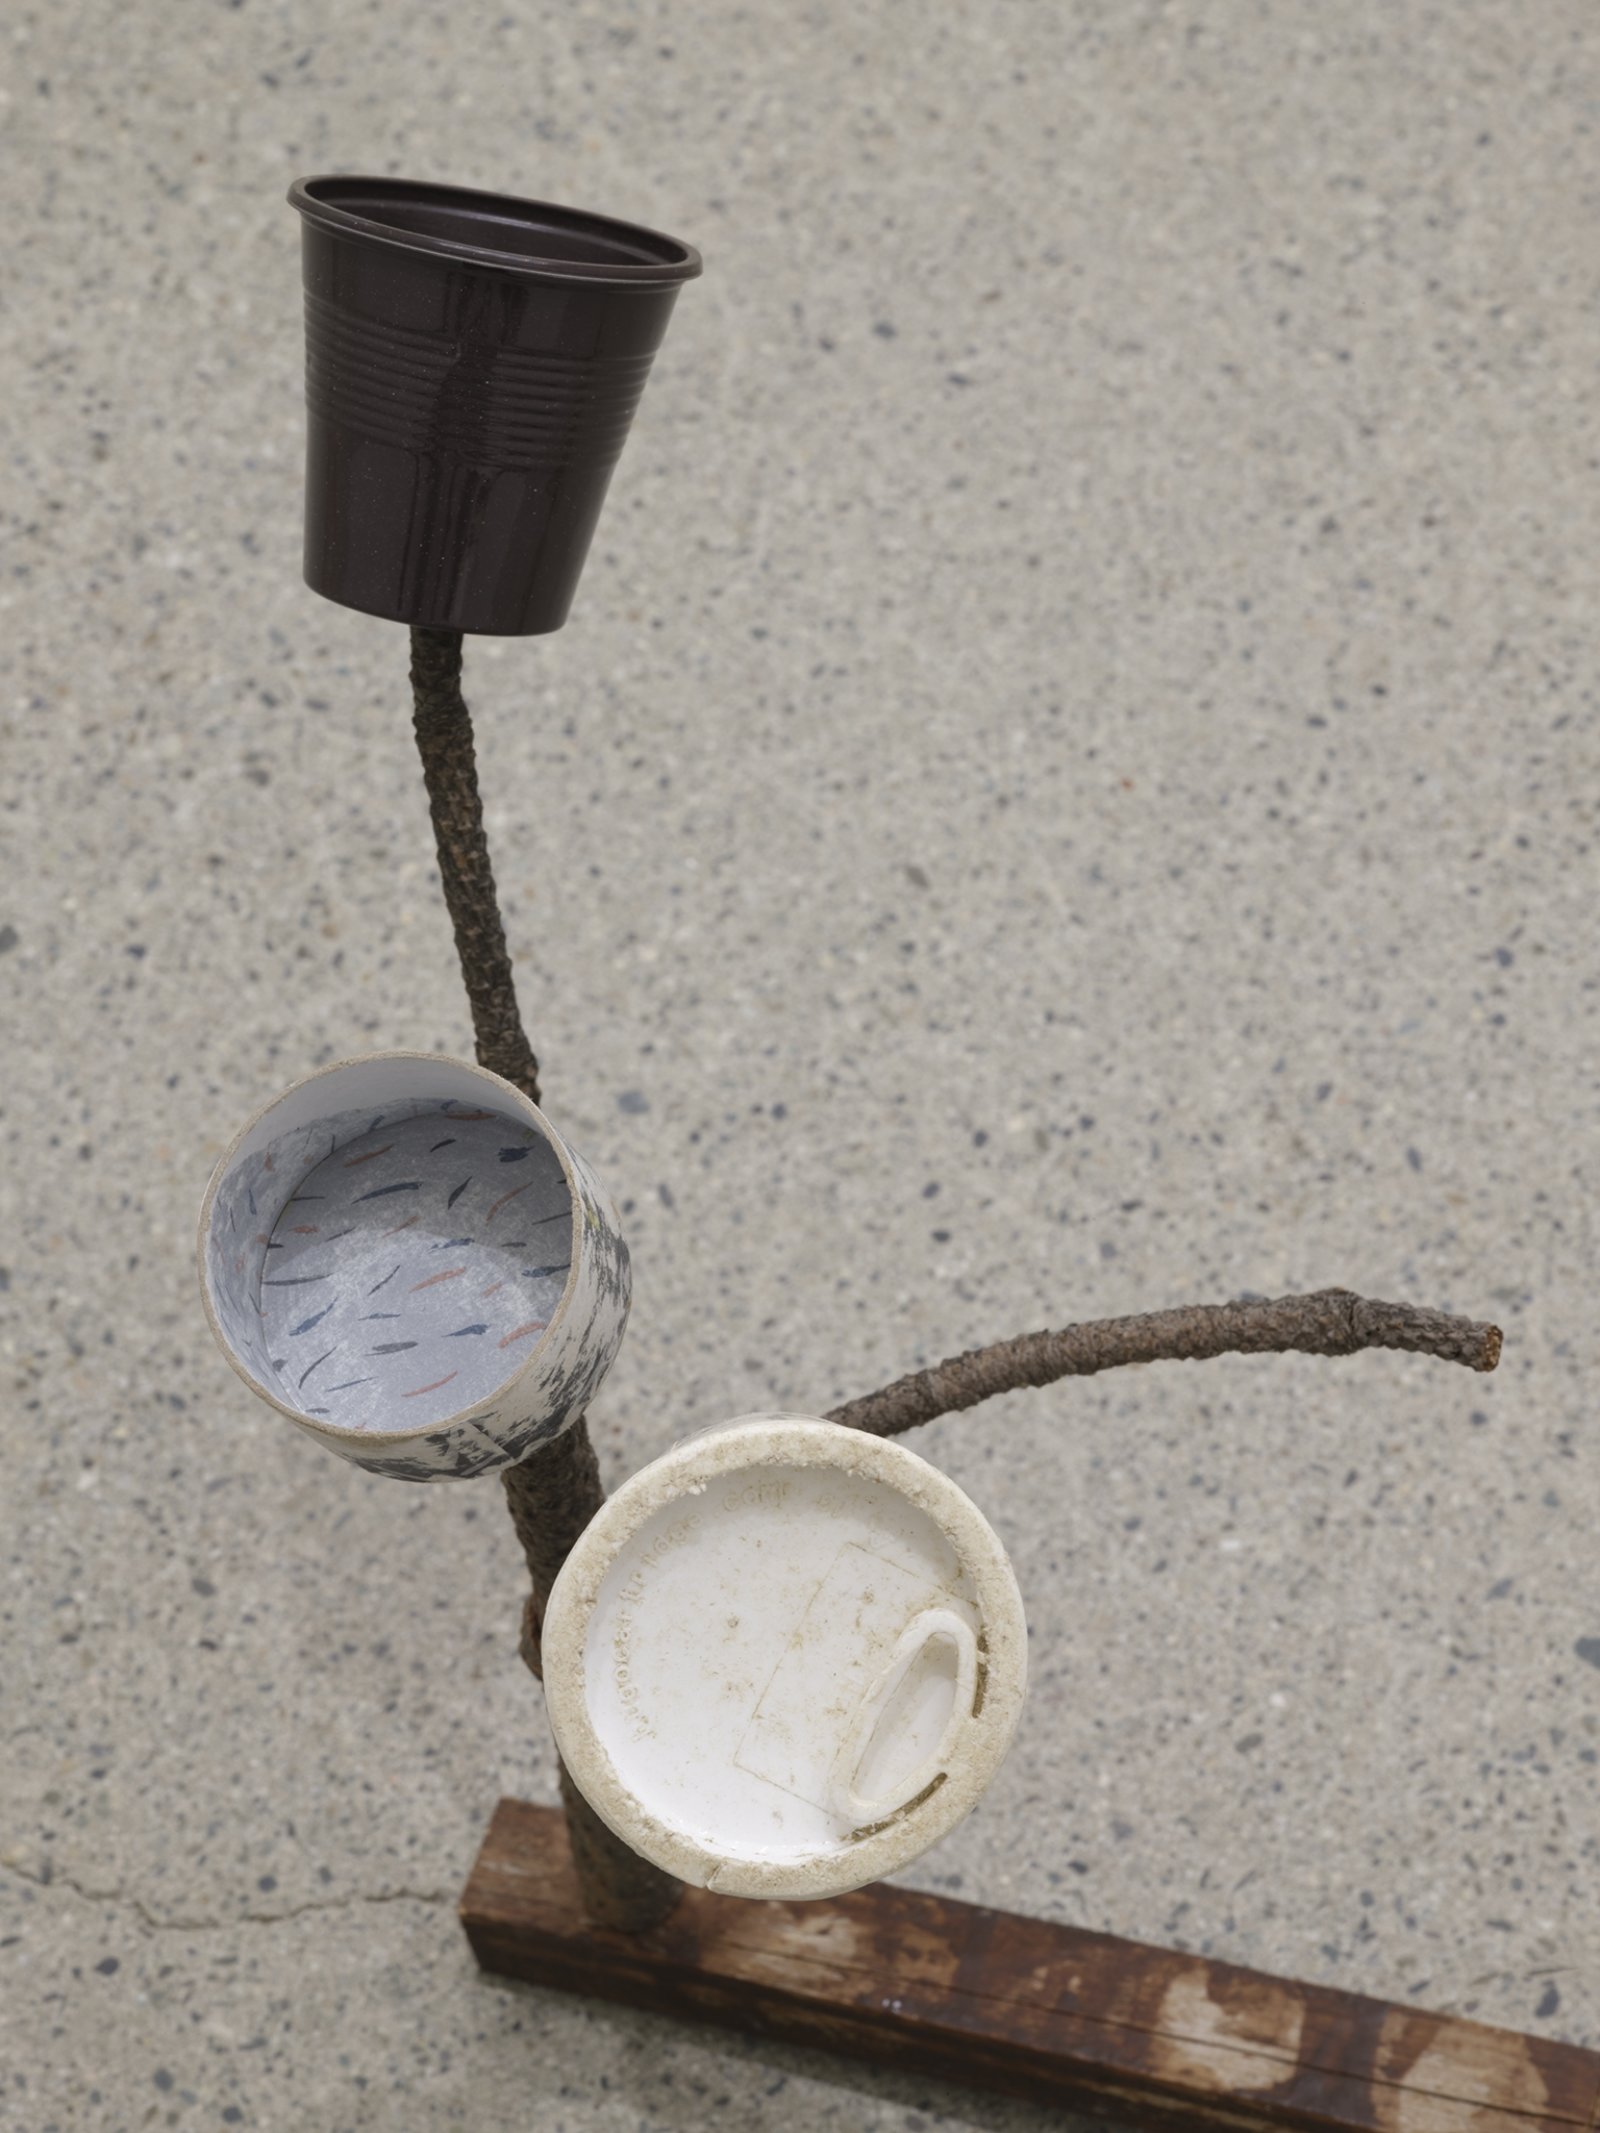 Ashes Withyman, Formula describing a soul rumbling off through the sky after leaving the body (detail), 2019, found branches, plywood with paint, plastic espresso cup, paper cup, lid, cardboard, push pin, 12 x 25 x 10 in. (31 x 64 x 25 cm)